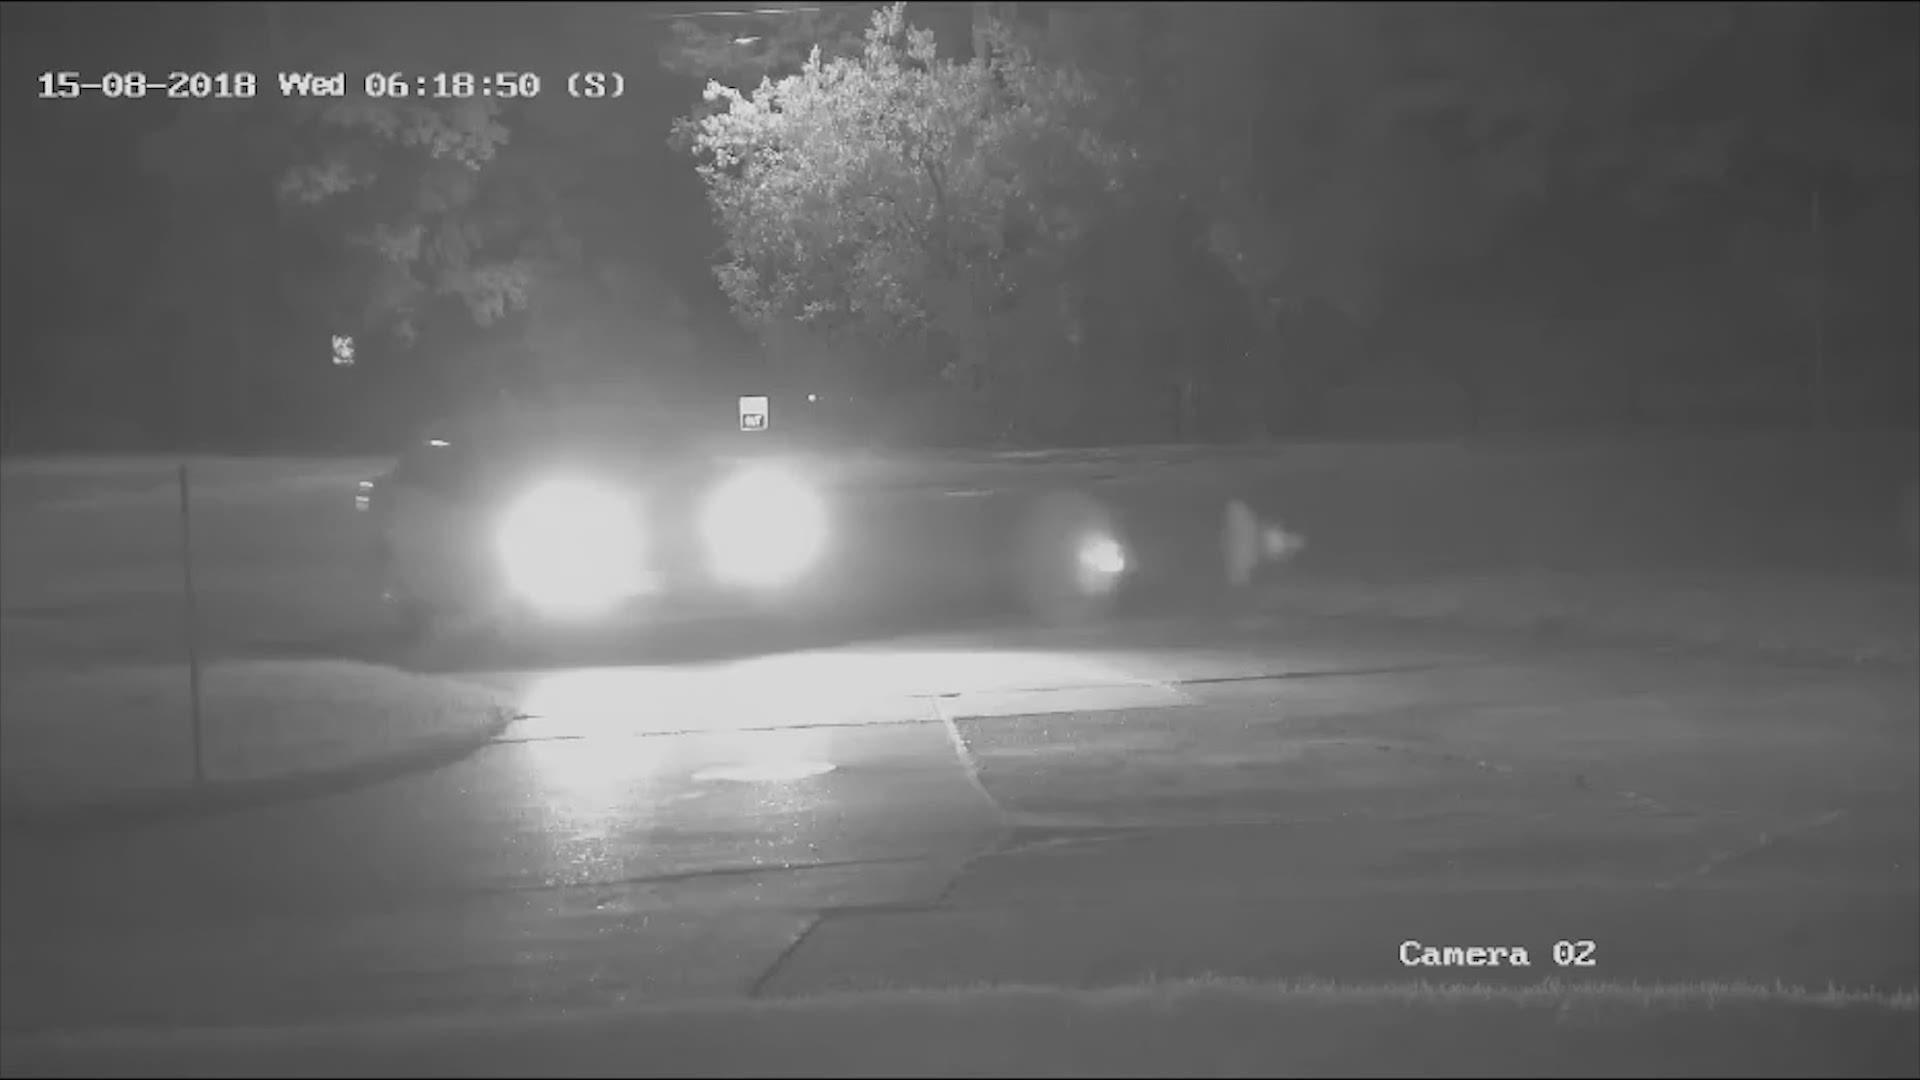 Baytown Police released new video Thursday of what they believe is the vehicle involved in a shooting that left an 84-year-old man injured.